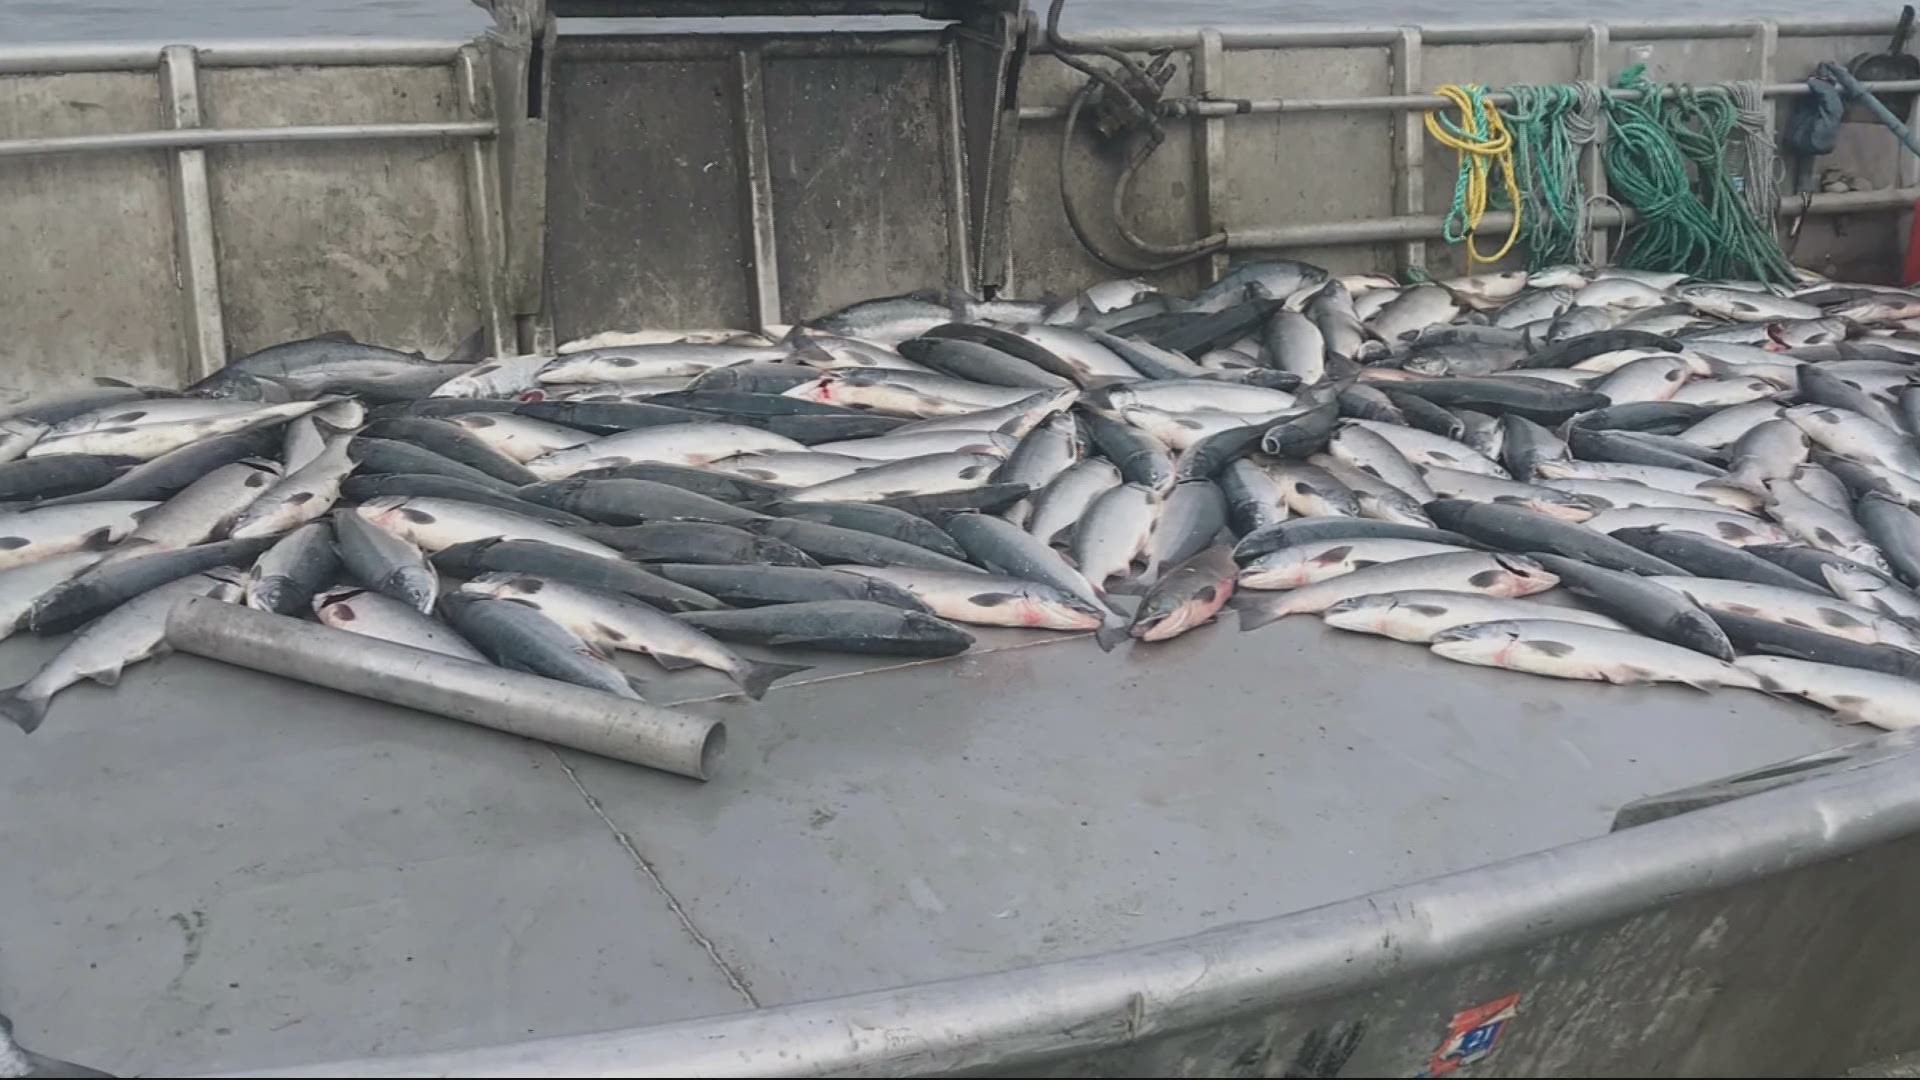 Apparently, some chefs have been sending their shipments of salmon back because they're too small. KGW's Keely Chalmers looked into why they're shrinking.